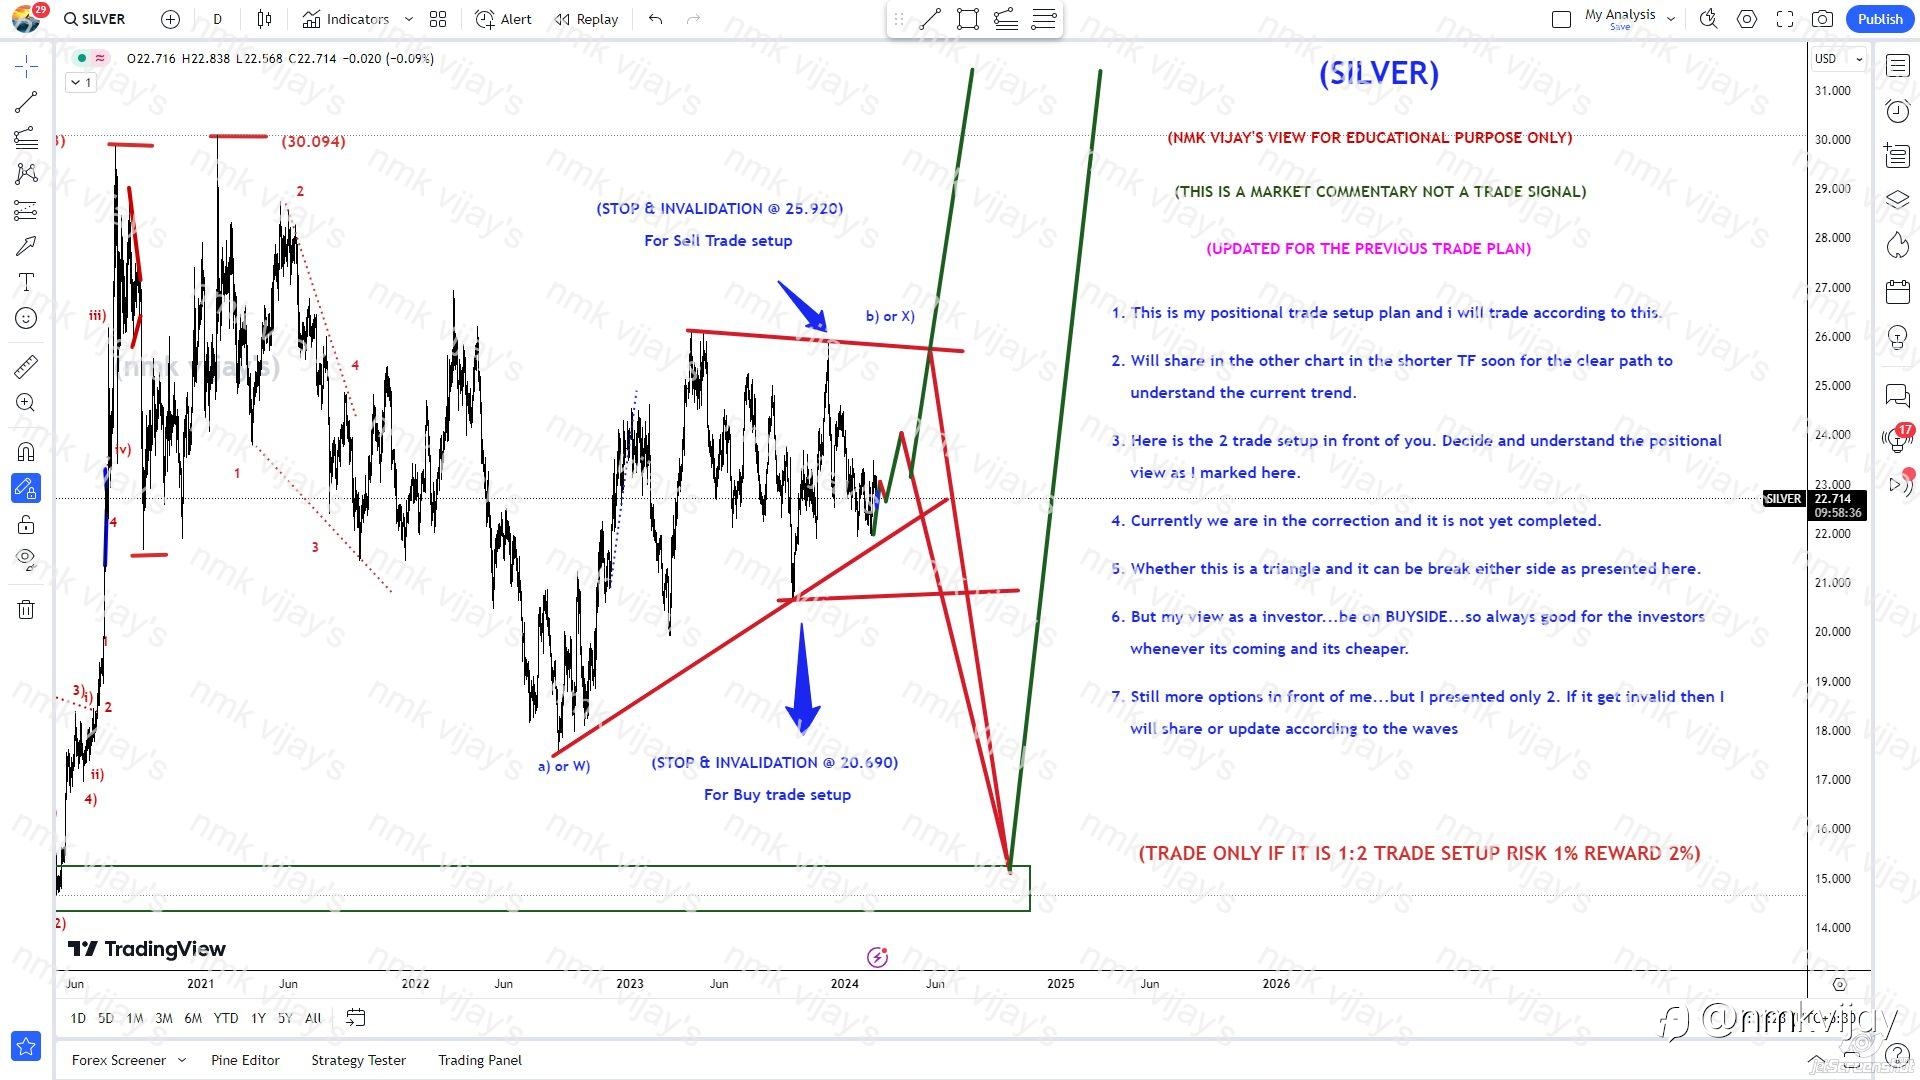 SILVER: Still we are in BIGGER Correction for positional trade.